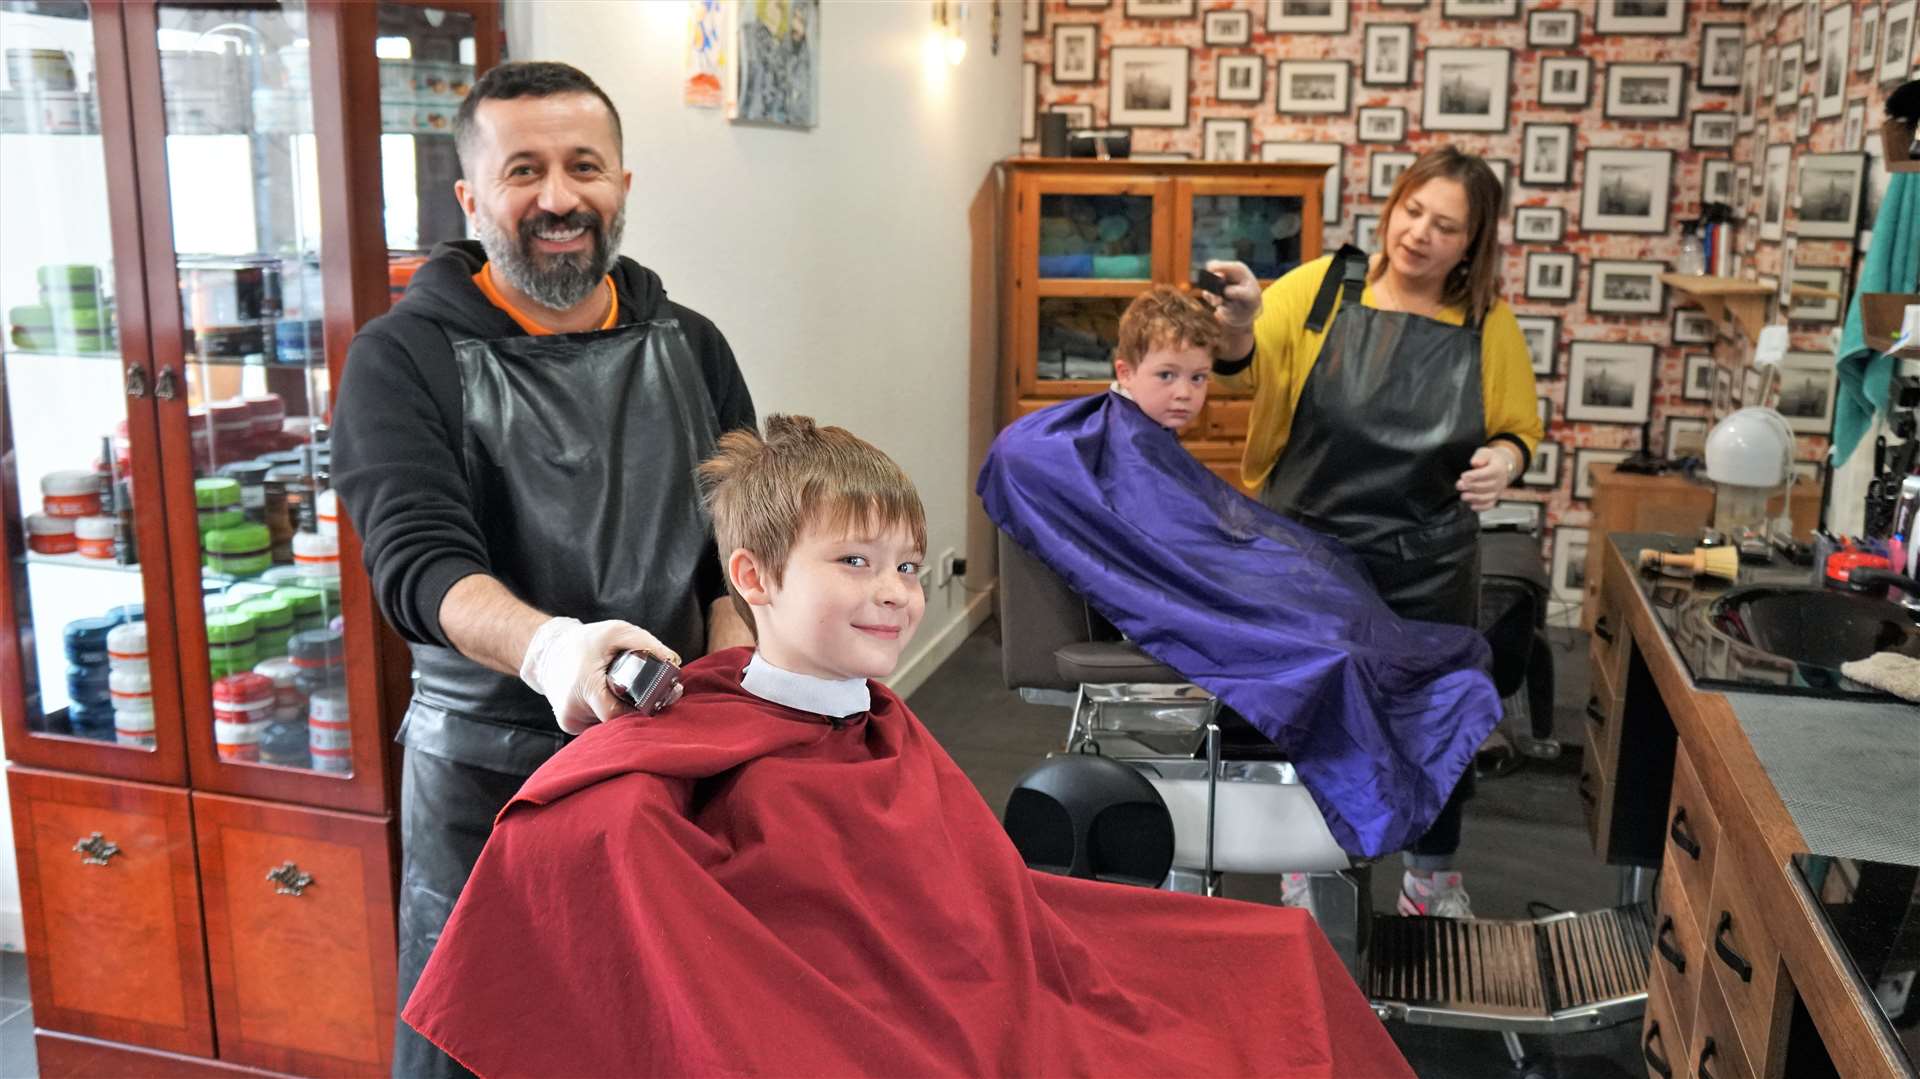 Ismail and his wife Derya cutting the hair of brothers Chase and Jax at their shop in Thurso. Picture: DGS